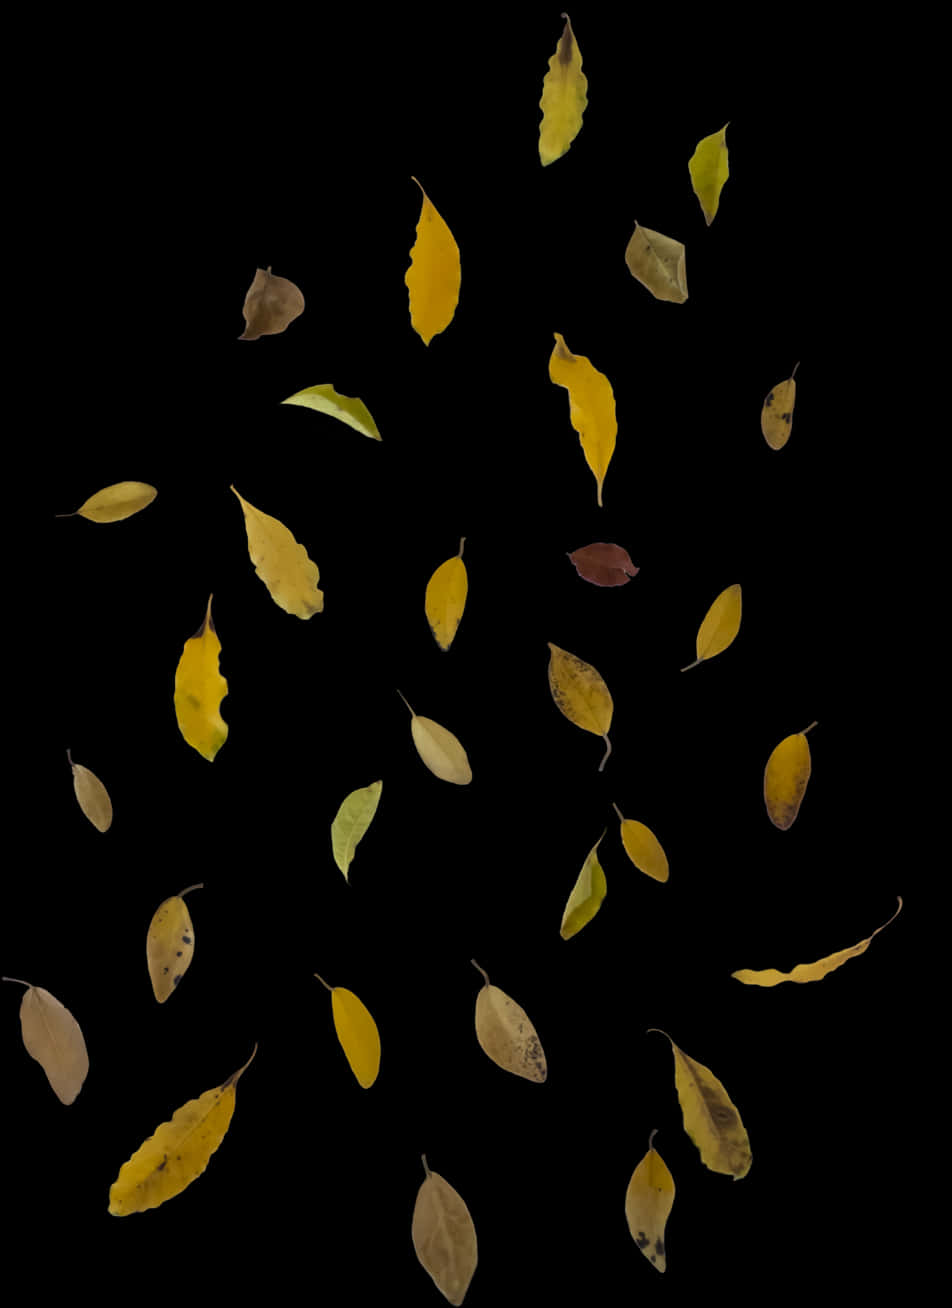 A Group Of Leaves Falling